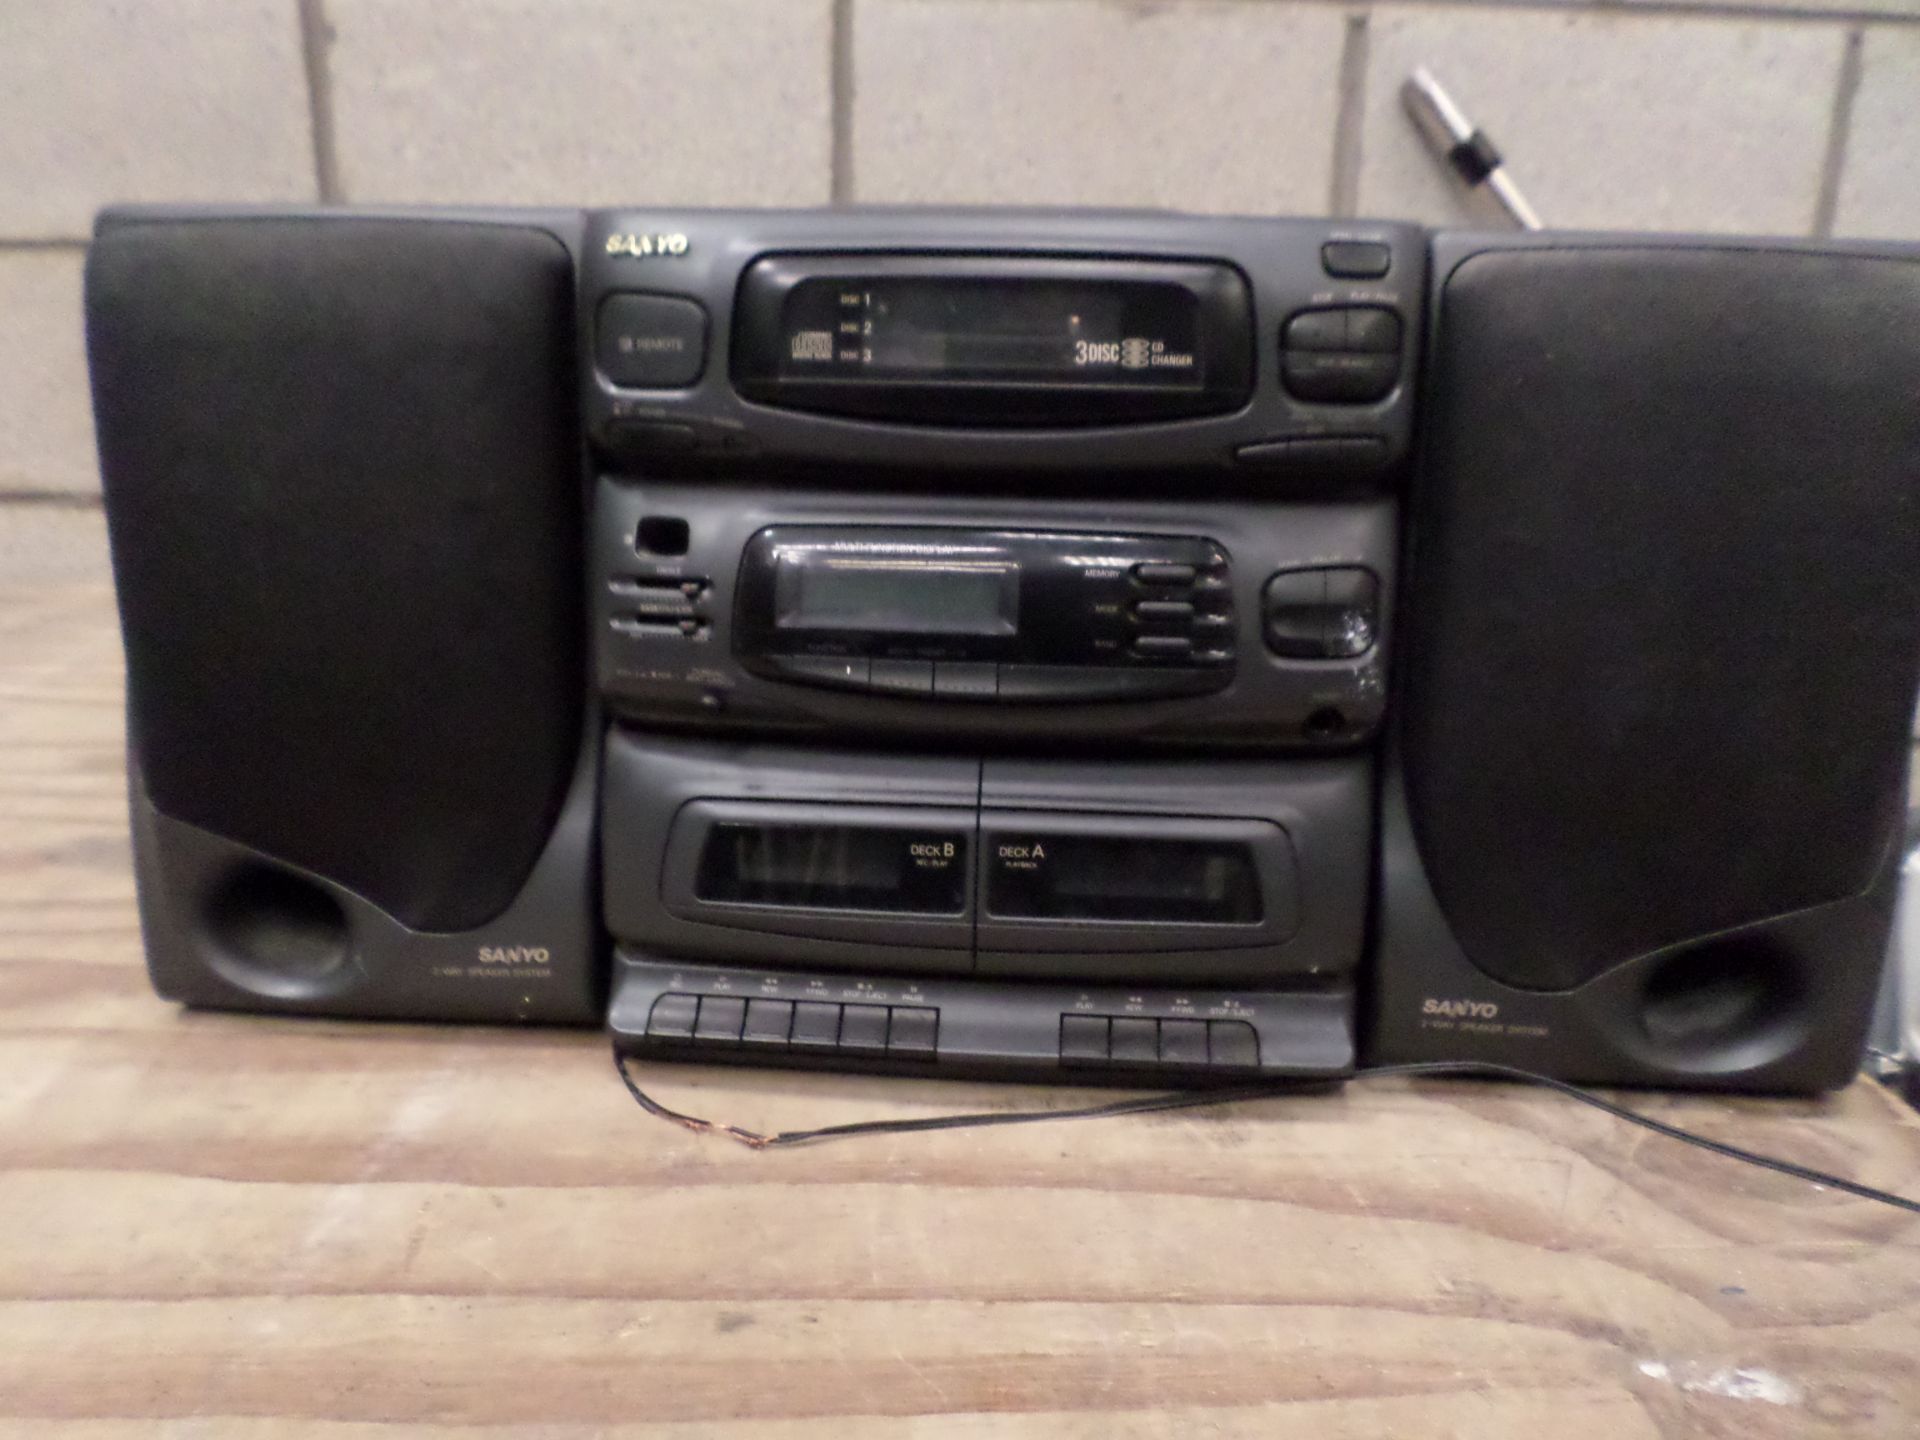 Sanyo stereo and speakers